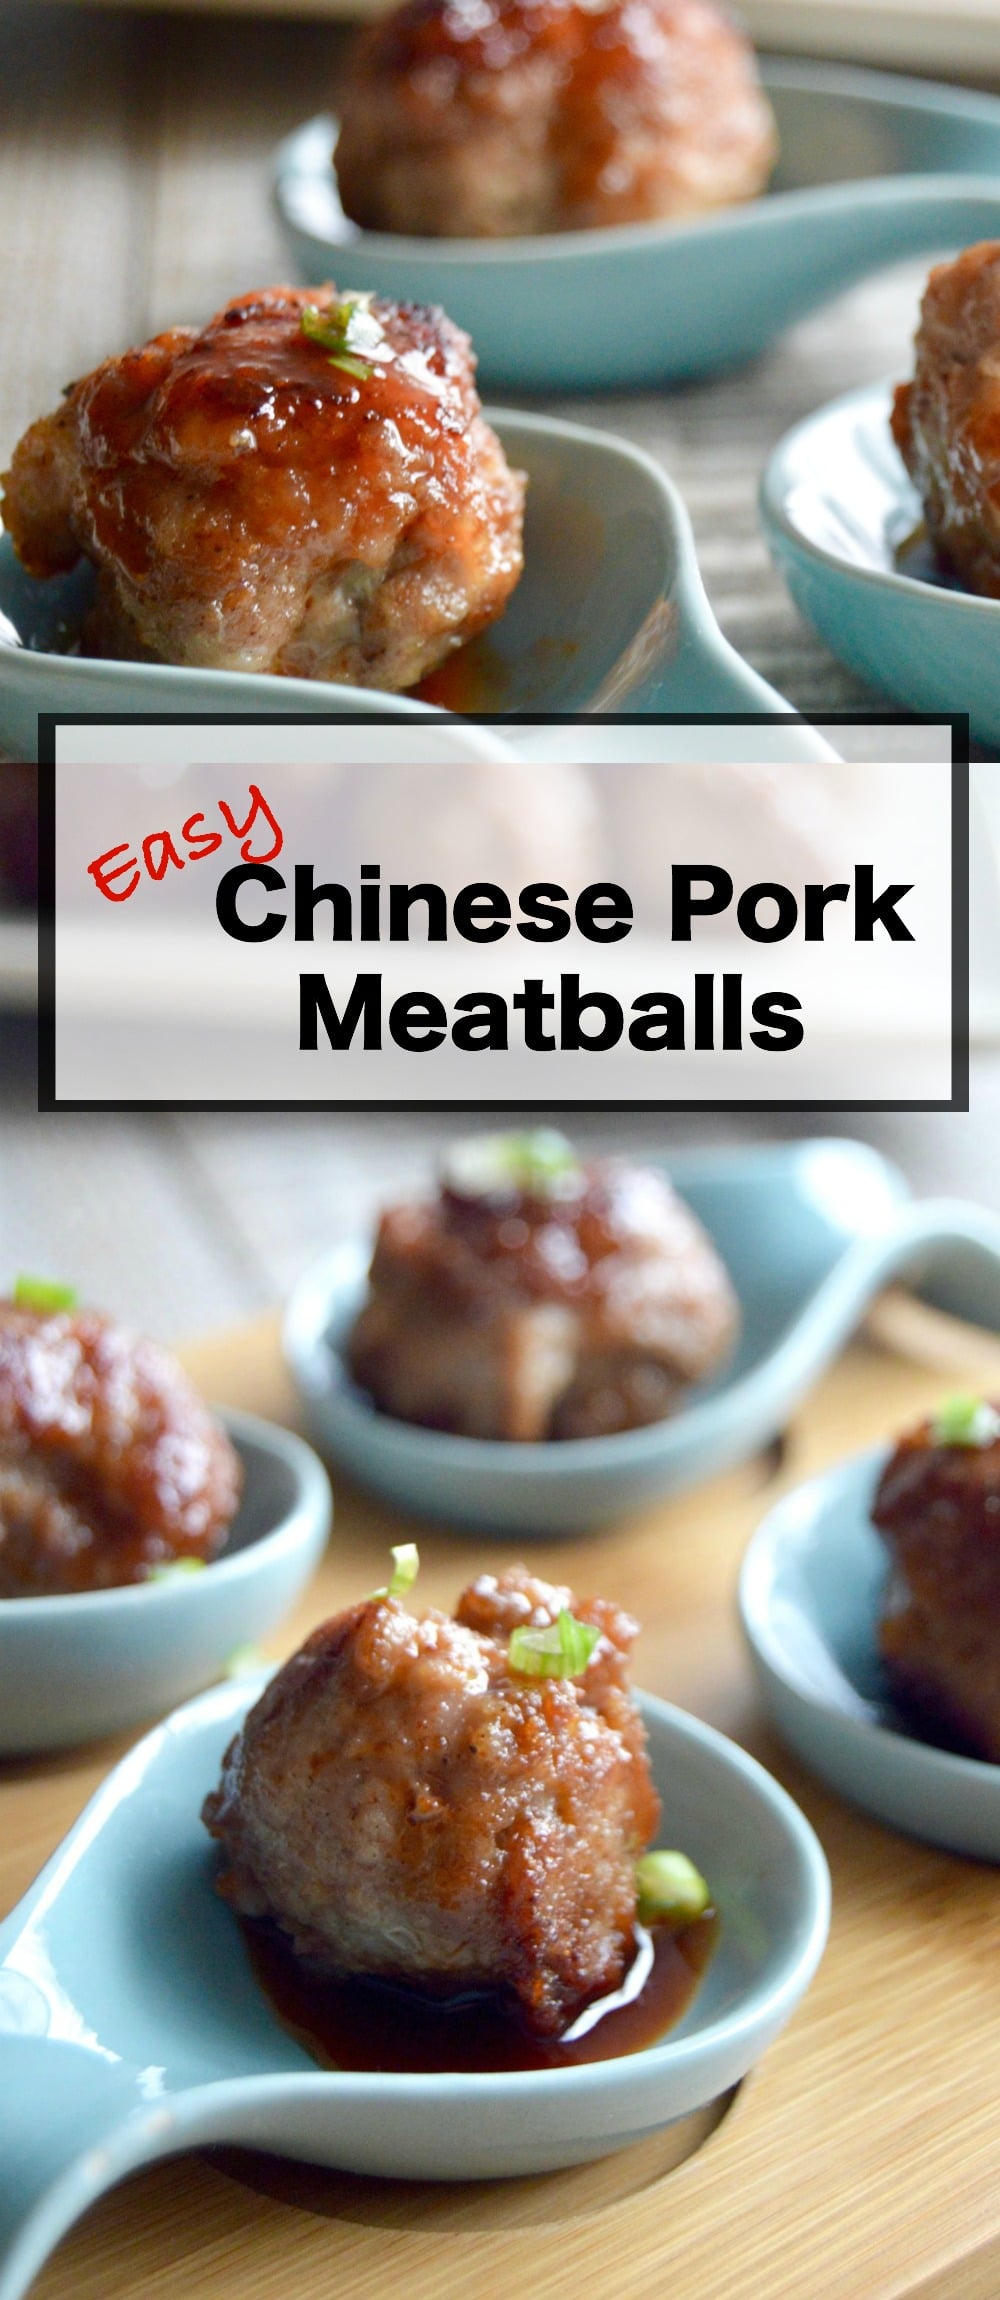 Chinese Pork meatballs: Char Seiw like charring on the edges with flavors hitting notes of sweet and salty in each that are ideal for a delicious appetizer in 20 minutes.